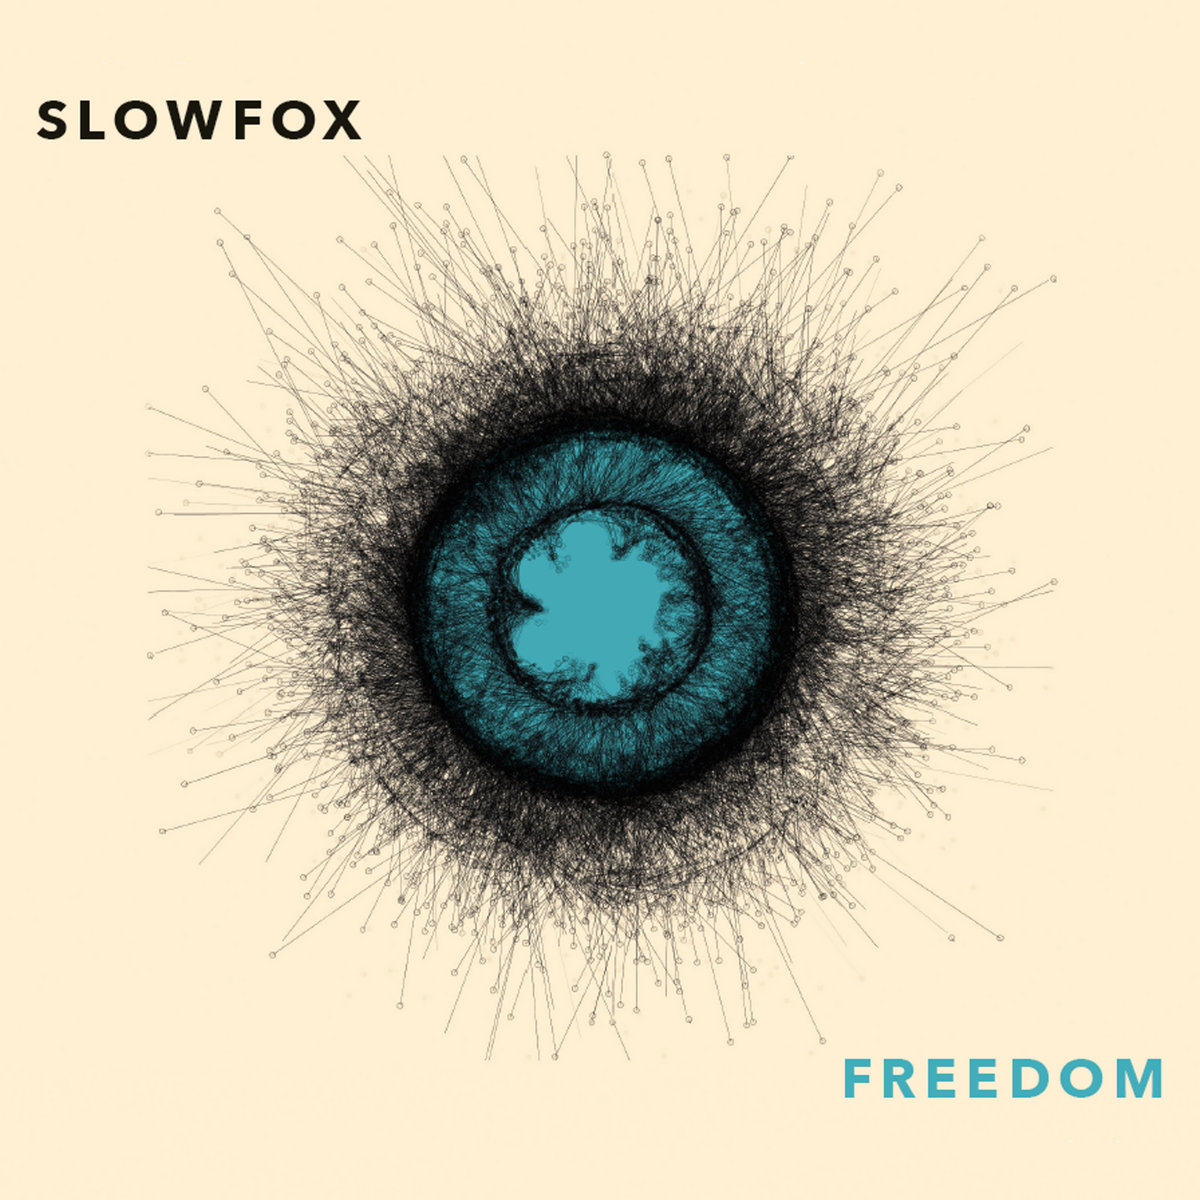 Abstract black and blue design against light beige background Text in corners reads "Slowfox," "Freedom"